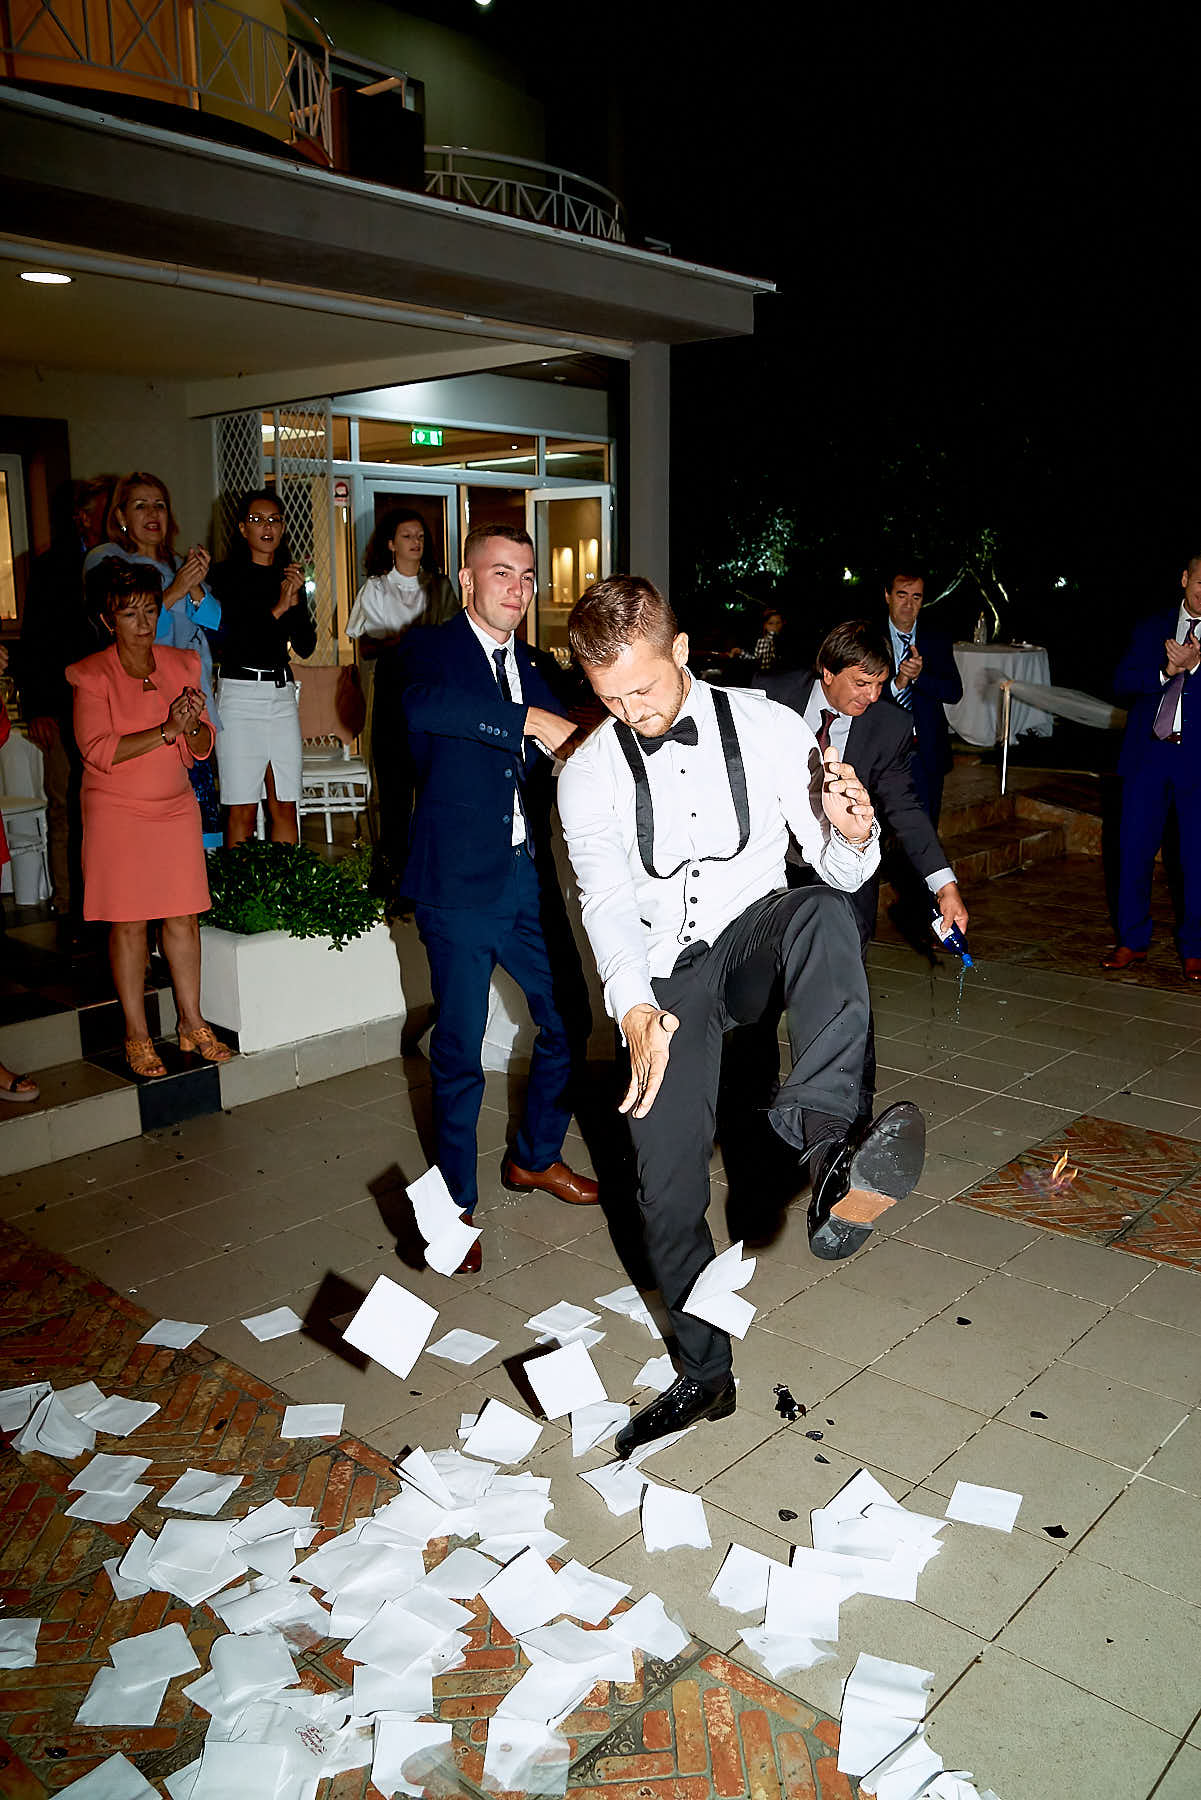 Groom dancing wildly and friends clapping